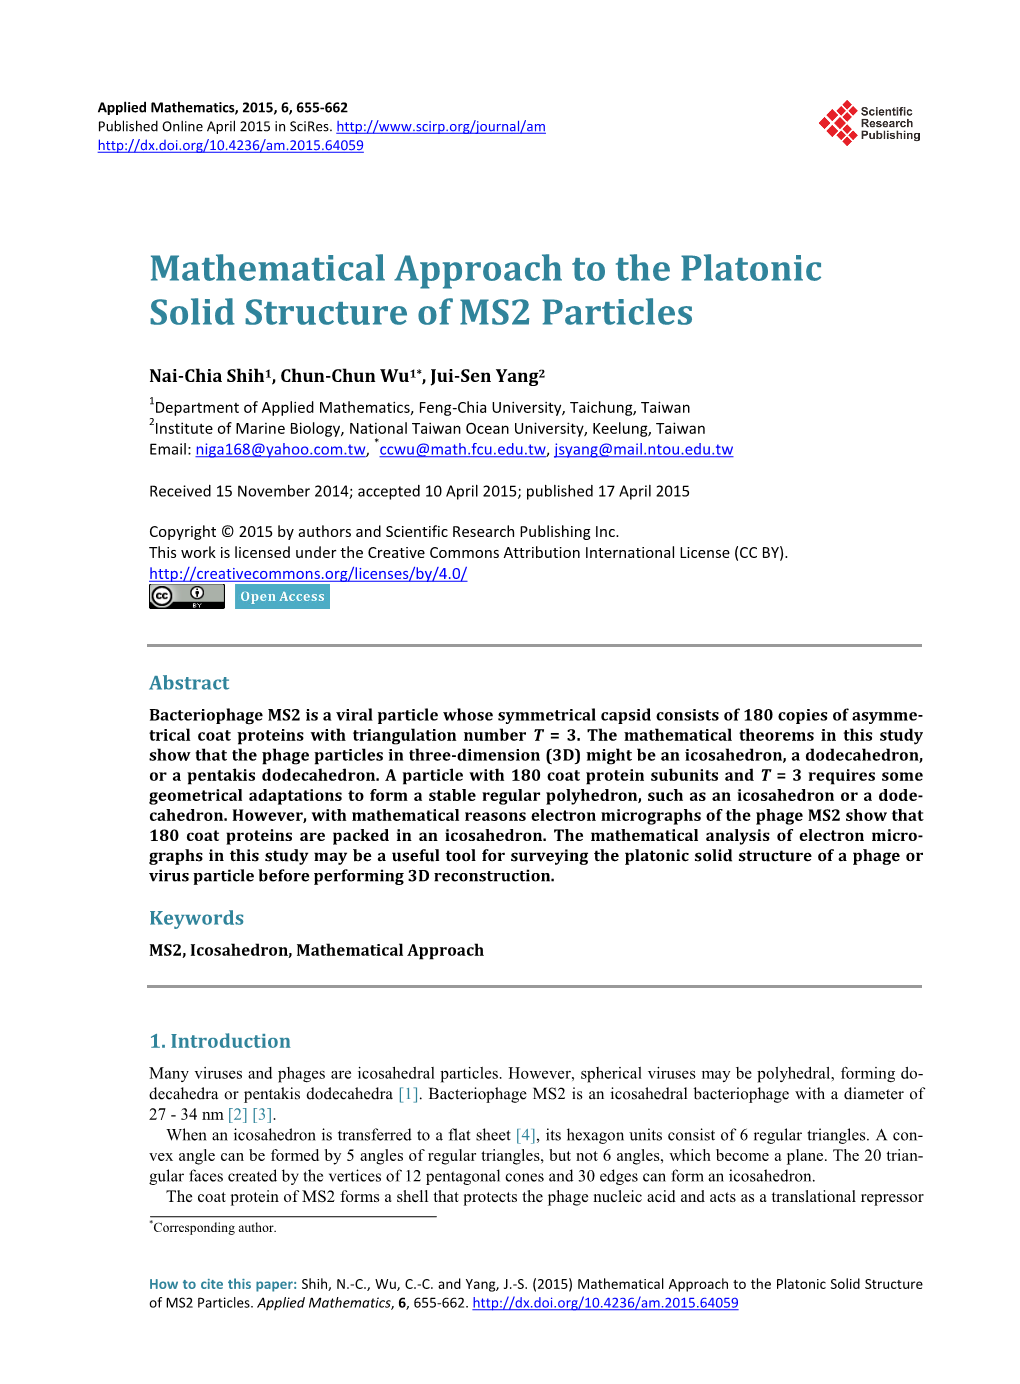 Mathematical Approach to the Platonic Solid Structure of MS2 Particles